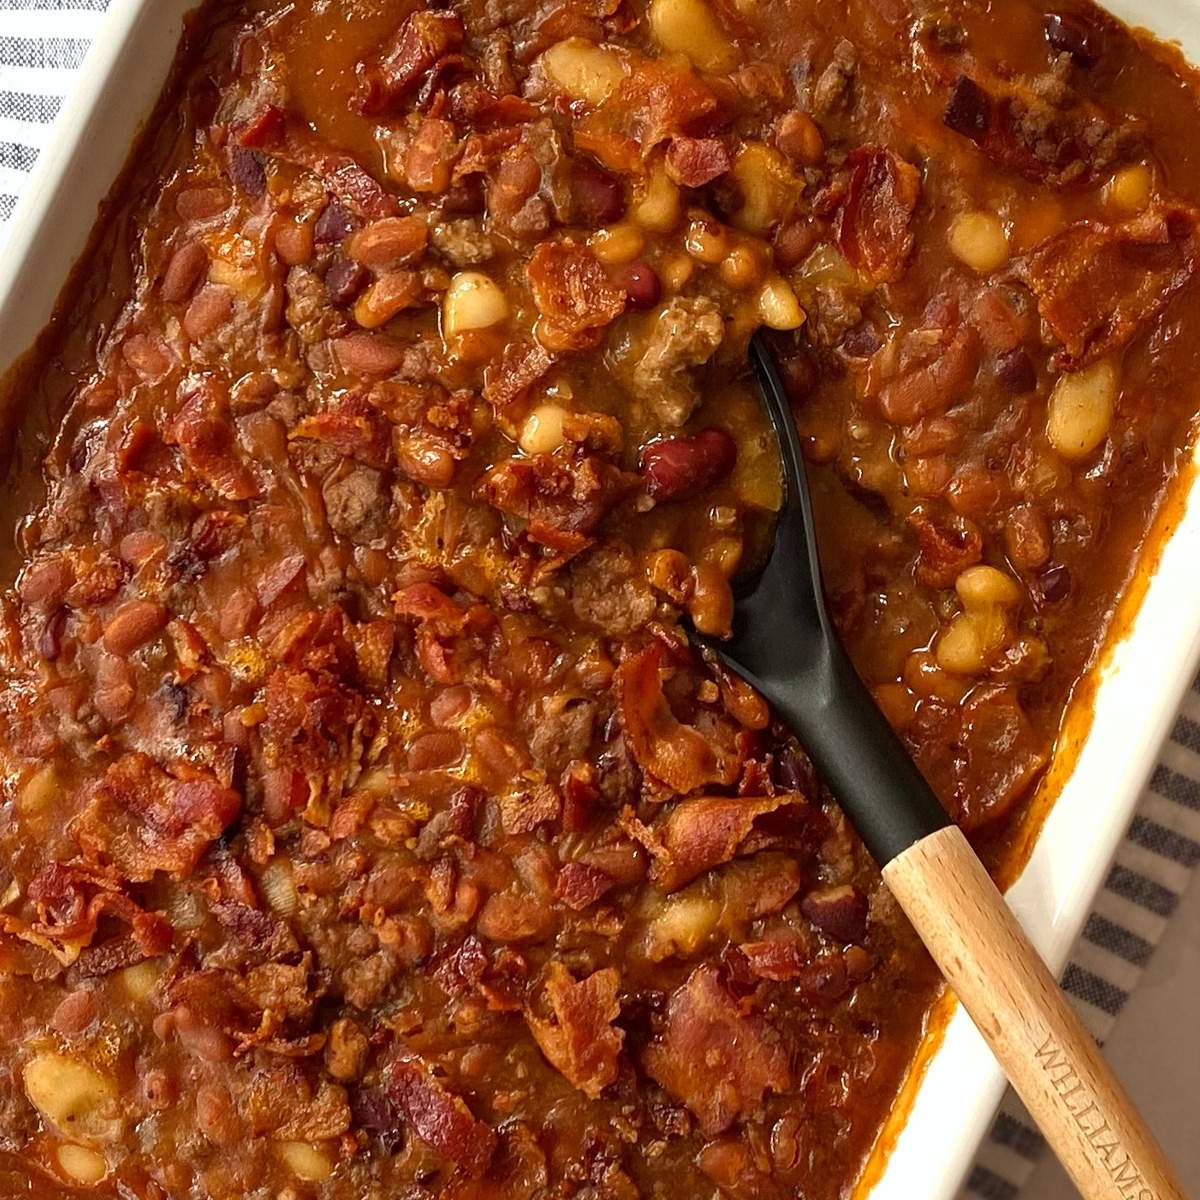 Serving spoon in a casserole dish of baked beans.